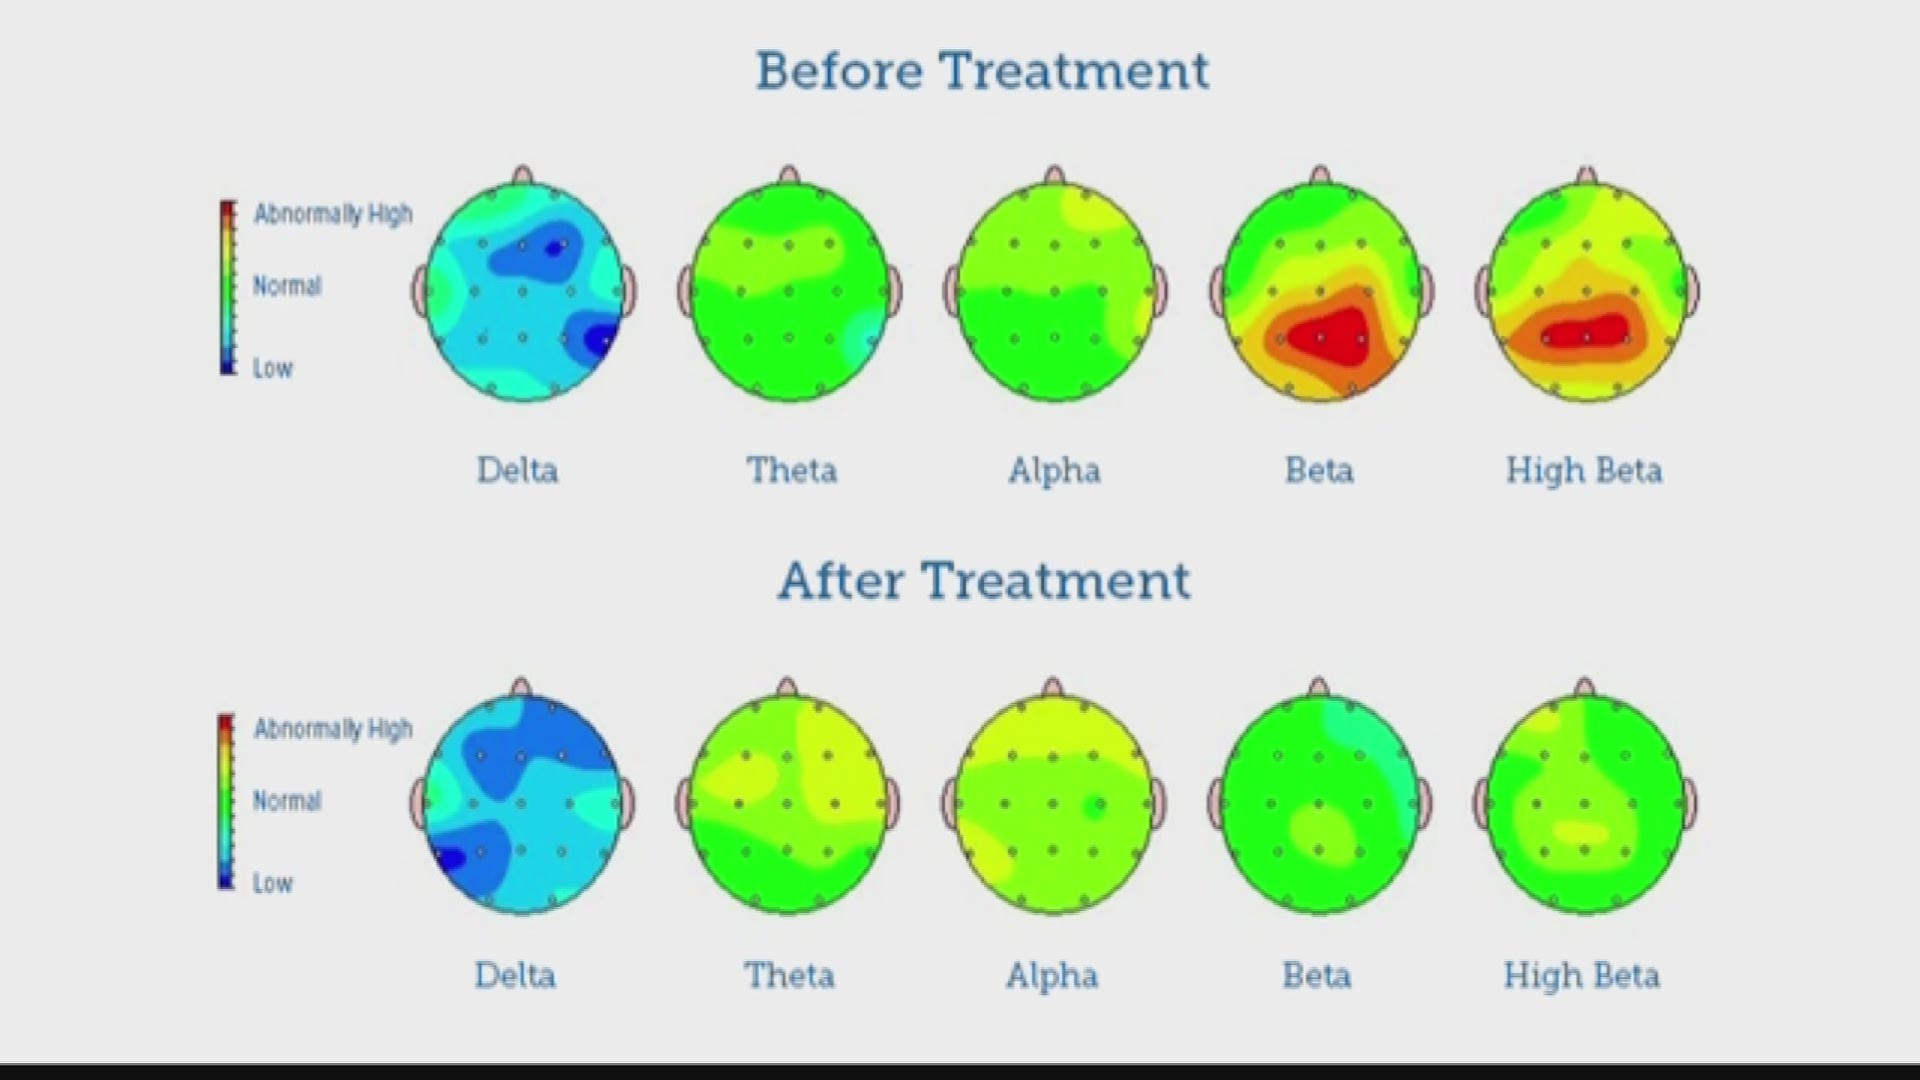 St. Louis Neurotherapy Institute uses Neurofeedback to find solutions.